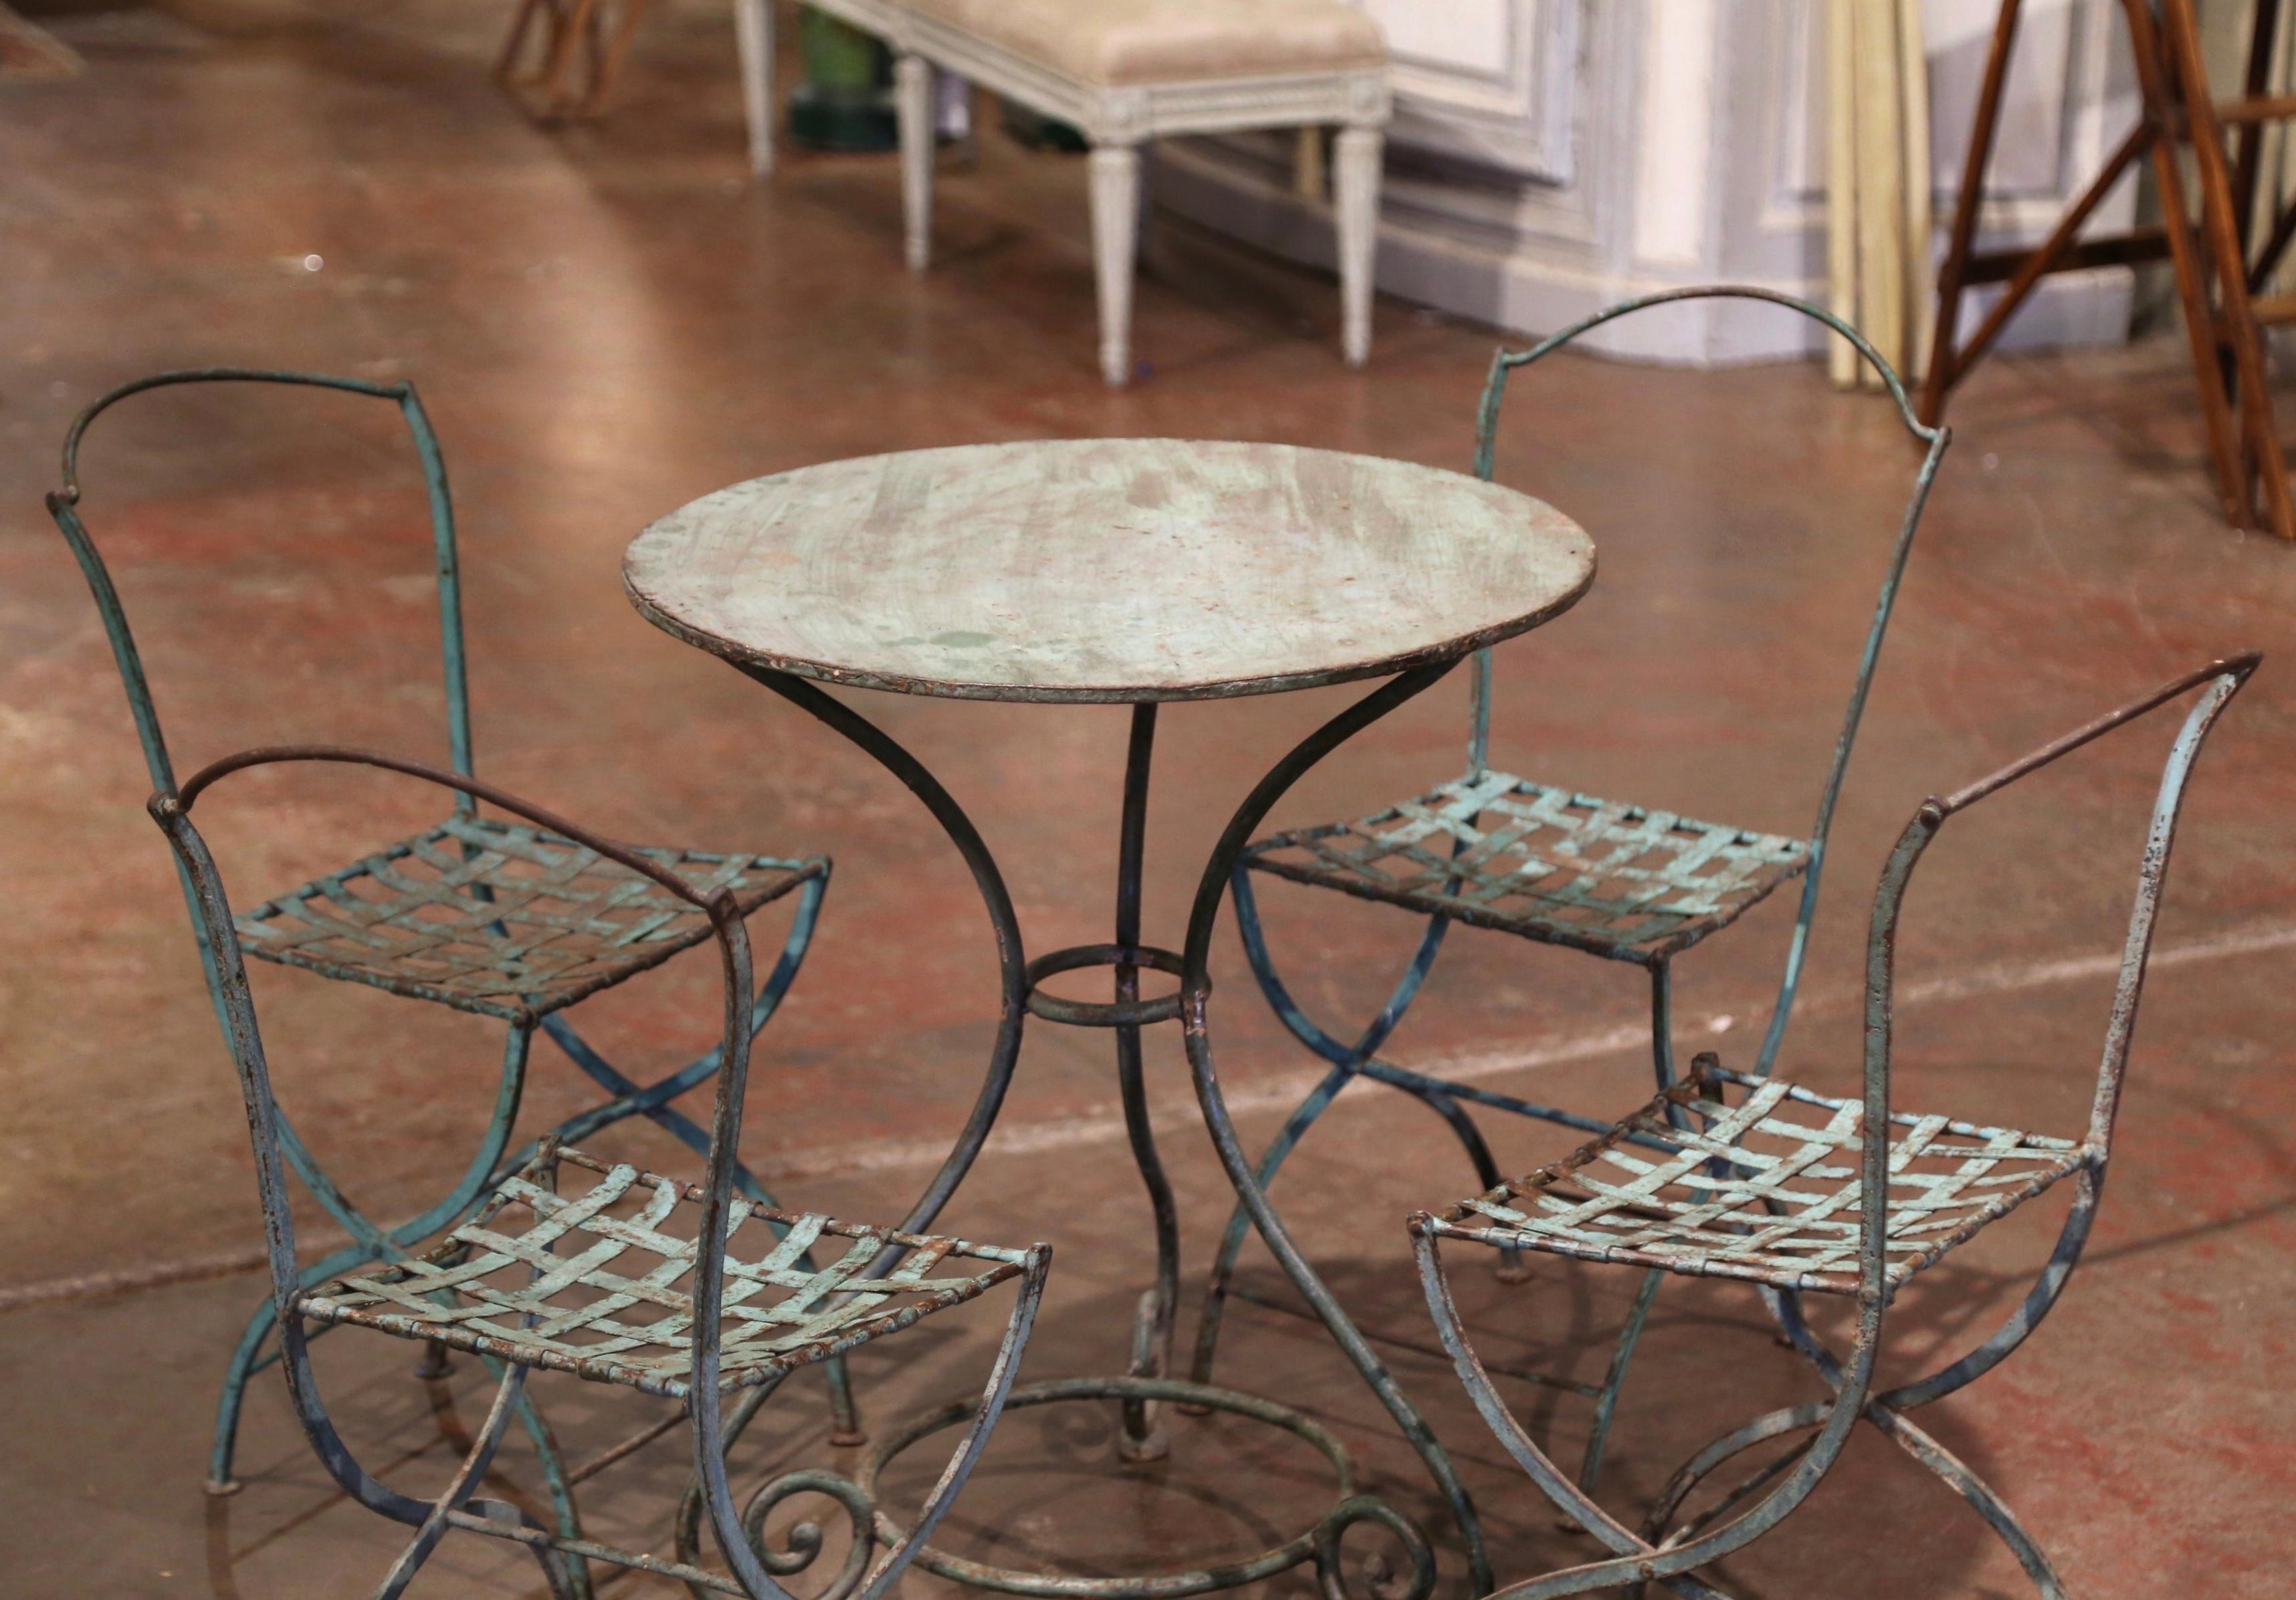 Decorate a backyard or a patio with this elegant antique bistrot set. Crafted in France circa 1880, the Napoleon III set includes a round pedestal table standing on three curved legs decorated with a circular bottom stretcher, and four matching